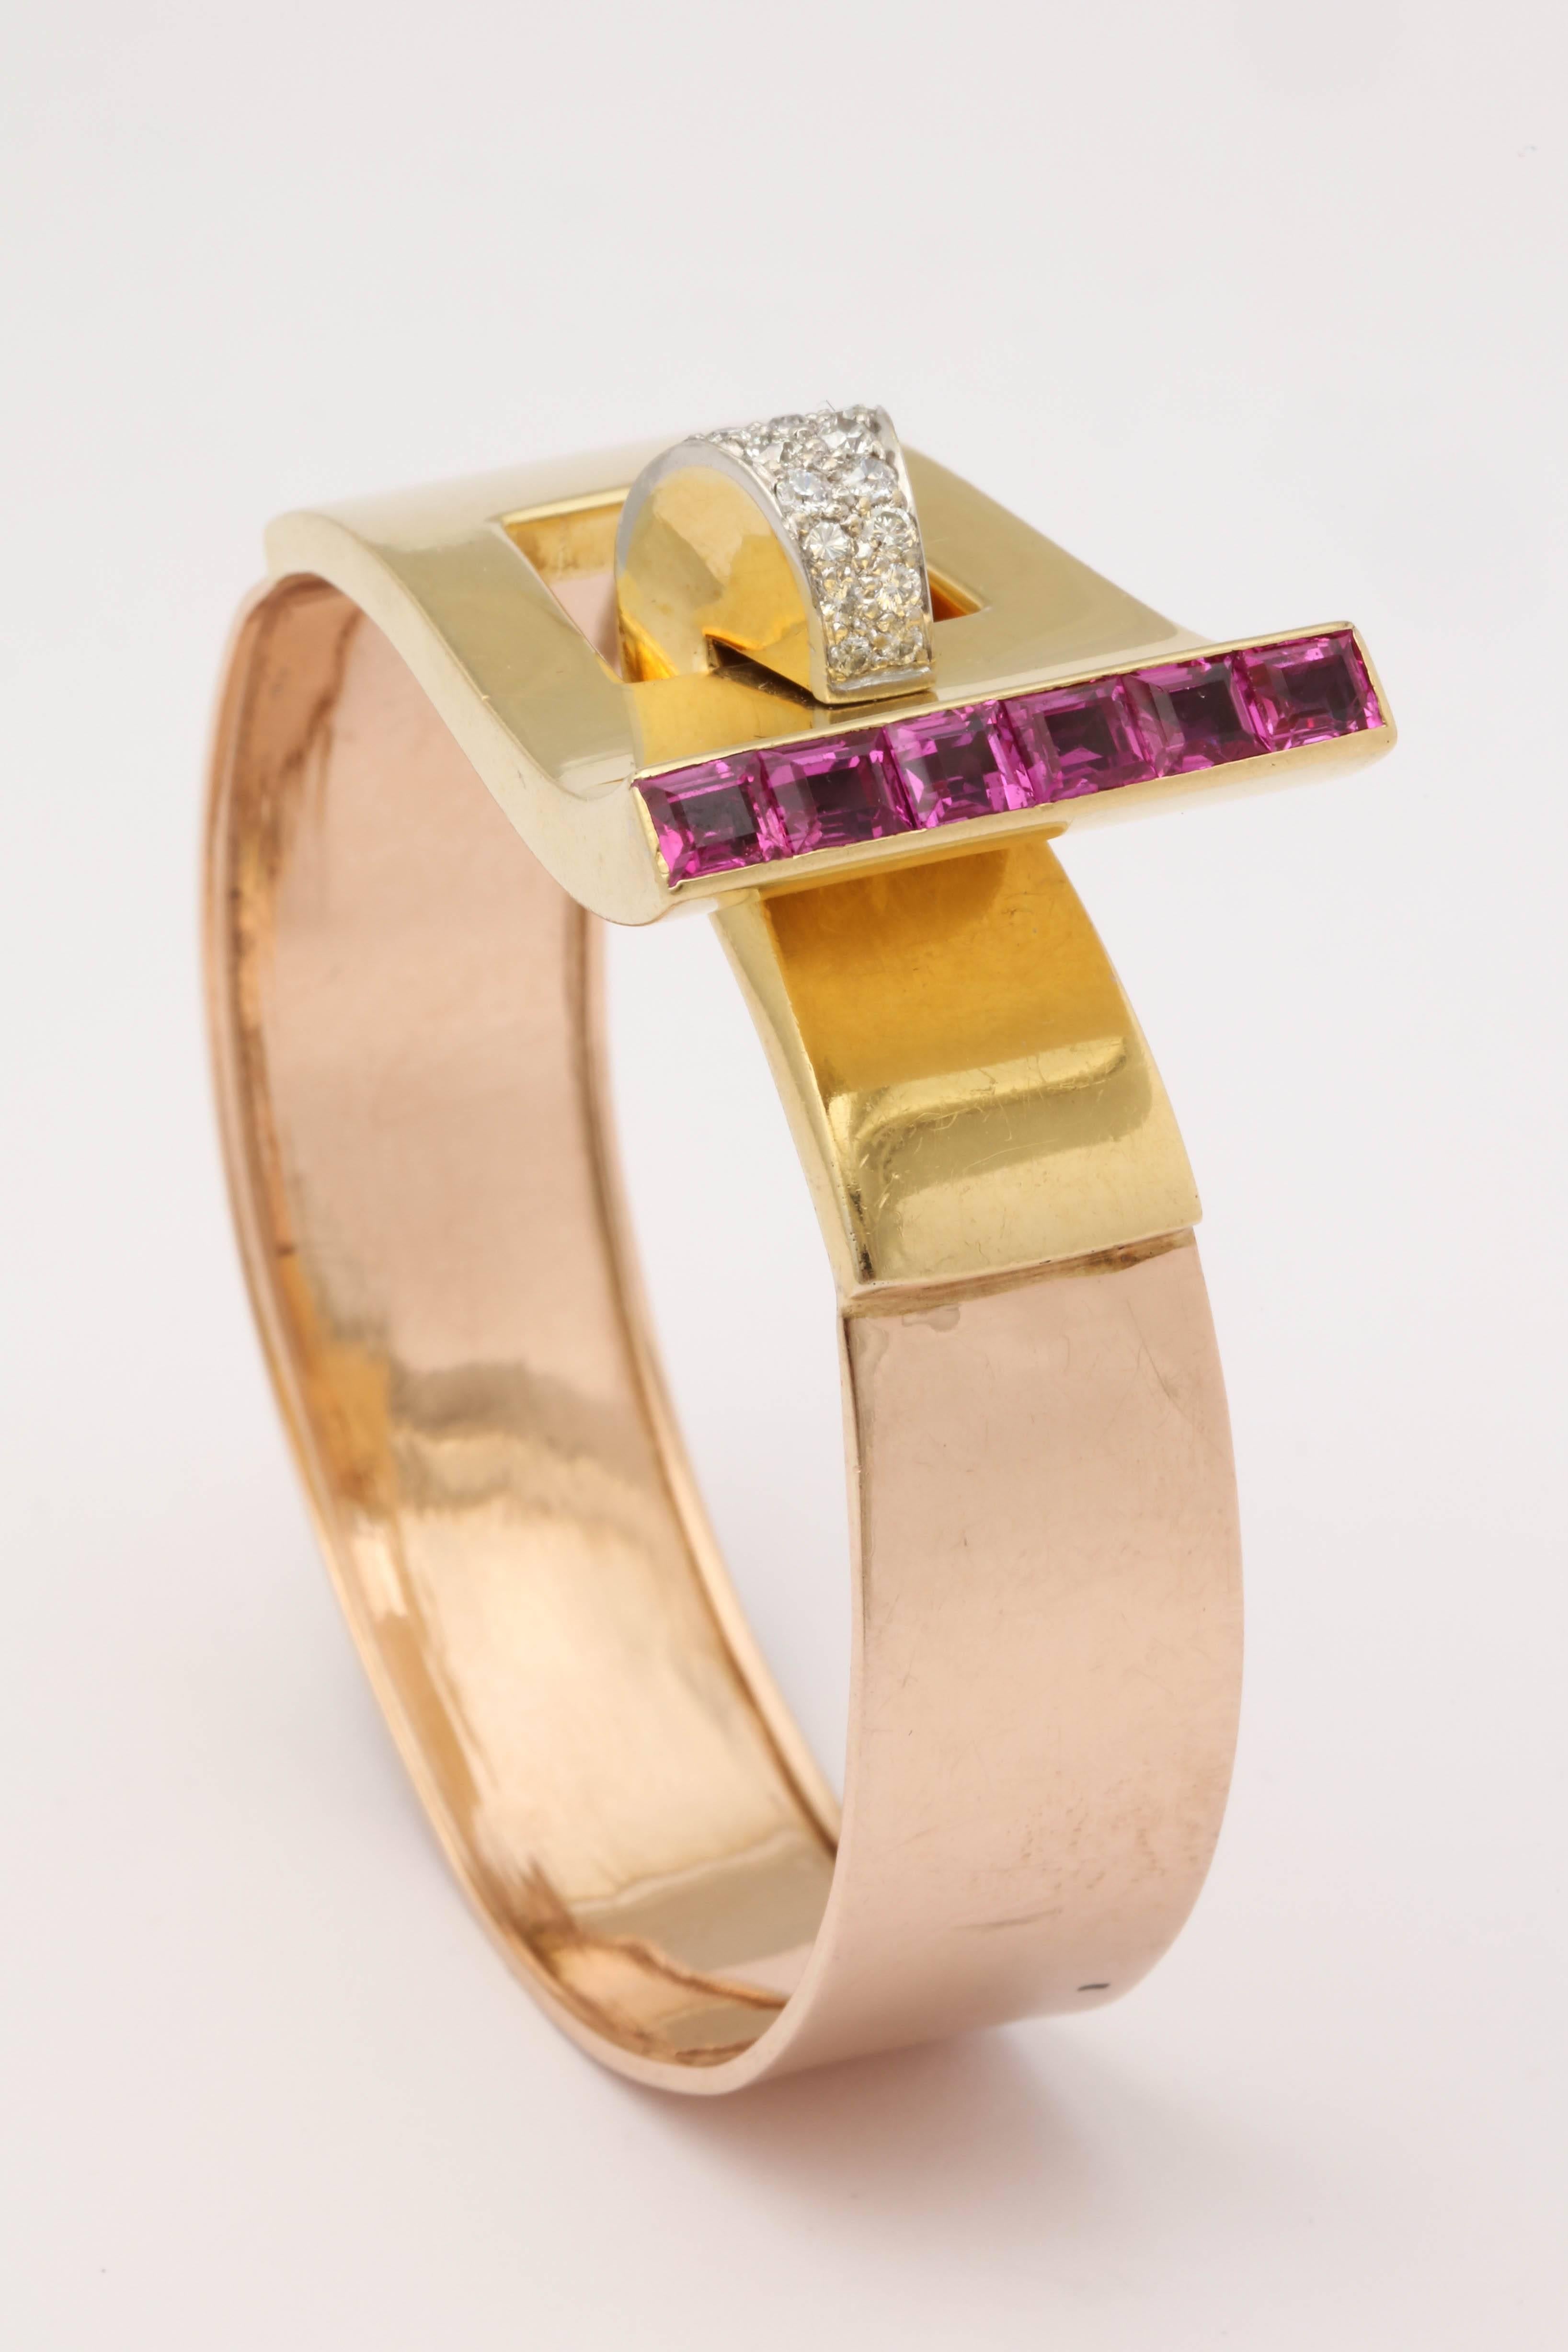 1940s Buckle Design Pink Sapphires with Diamonds Gold Bangle Cuff Bracelet 2